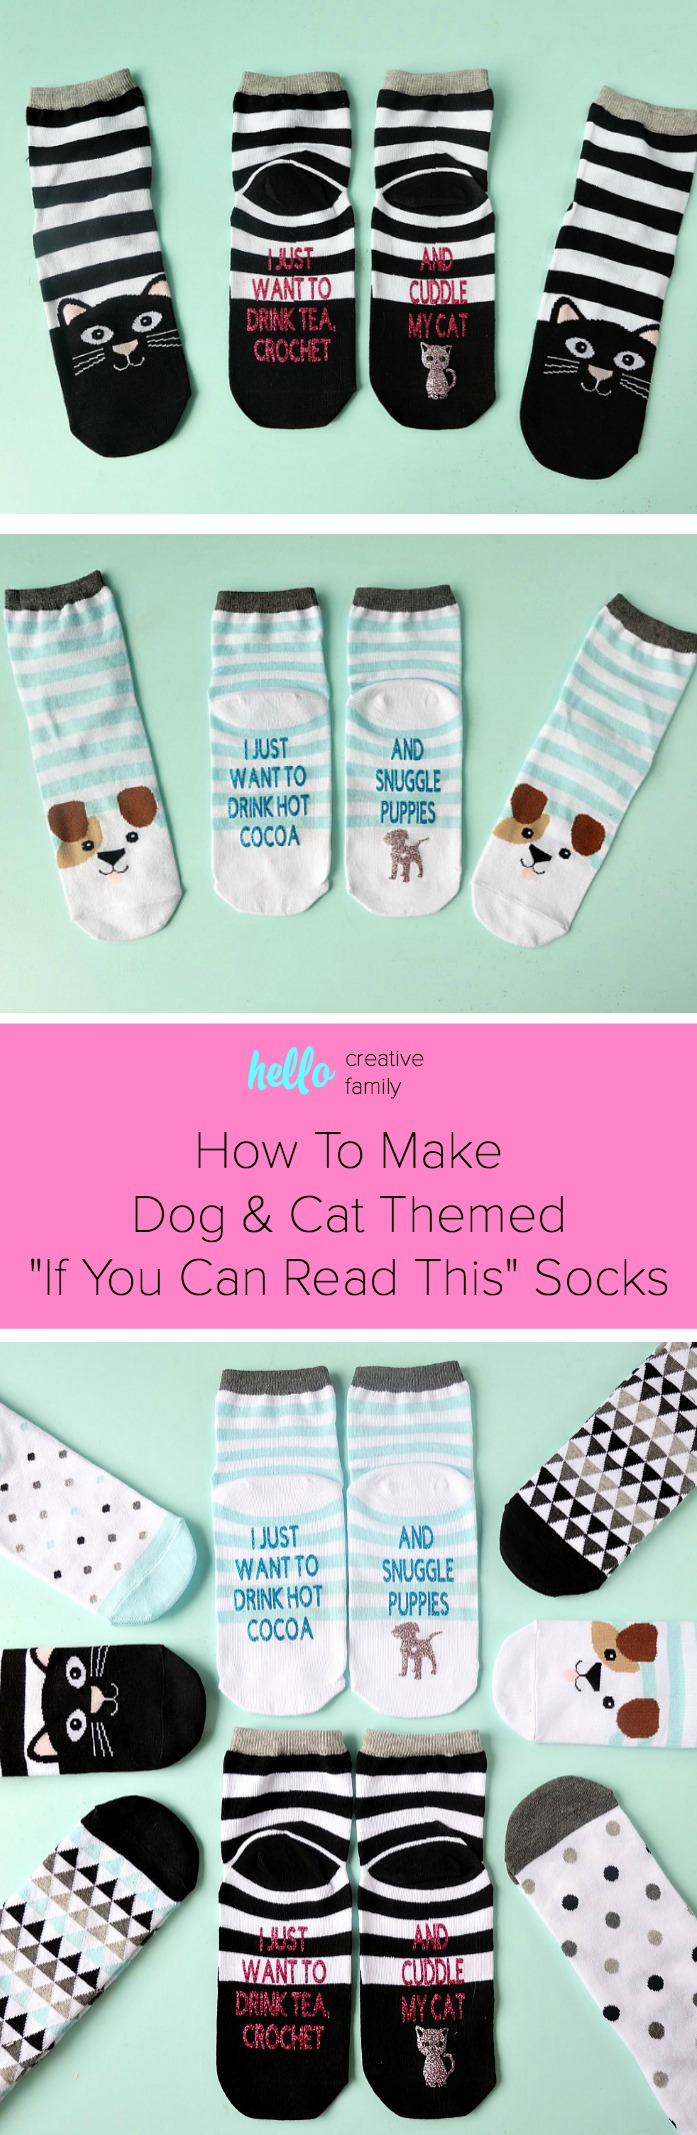 The perfect handmade gift idea for dog and cat lovers! These DIY dog and cat themed "If You Can Read This Socks" are easy to make using a Cricut Maker or Cricut Explore and turn out so cute! Change the wording using our free Cricut Cut File! This is an adorable stocking stuffer idea under $5.00! Perfect for Easter Basket Stuffers too! #cricutmaker #cricutmade #cricutproject #stockingstuffer